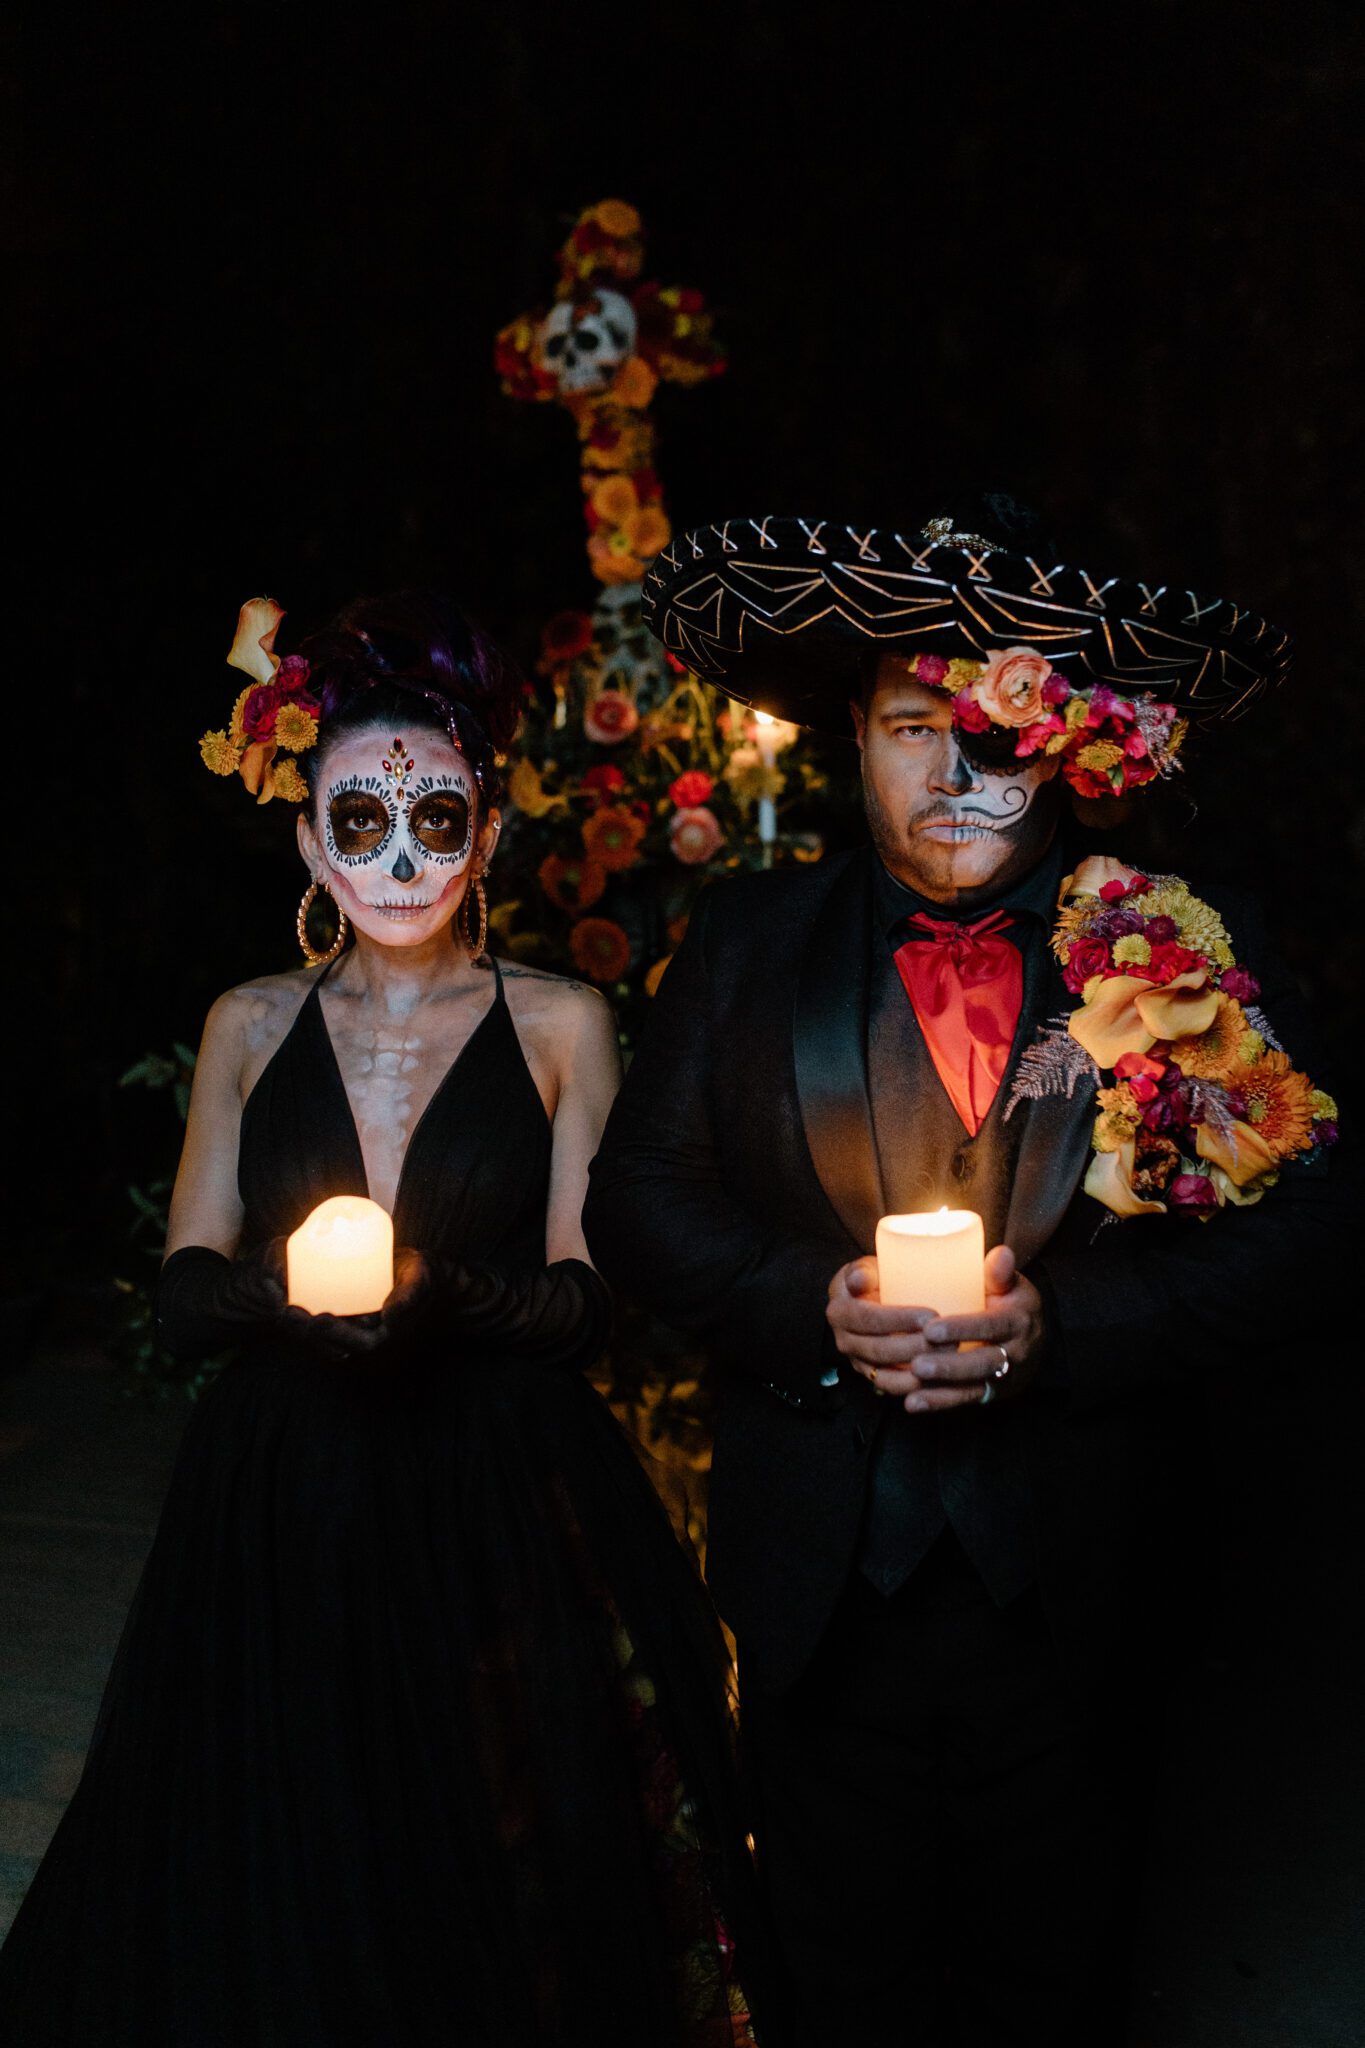 Couple holding candles in mystical Day of the Dead inspiration photo, captured by Nikki Collette. 